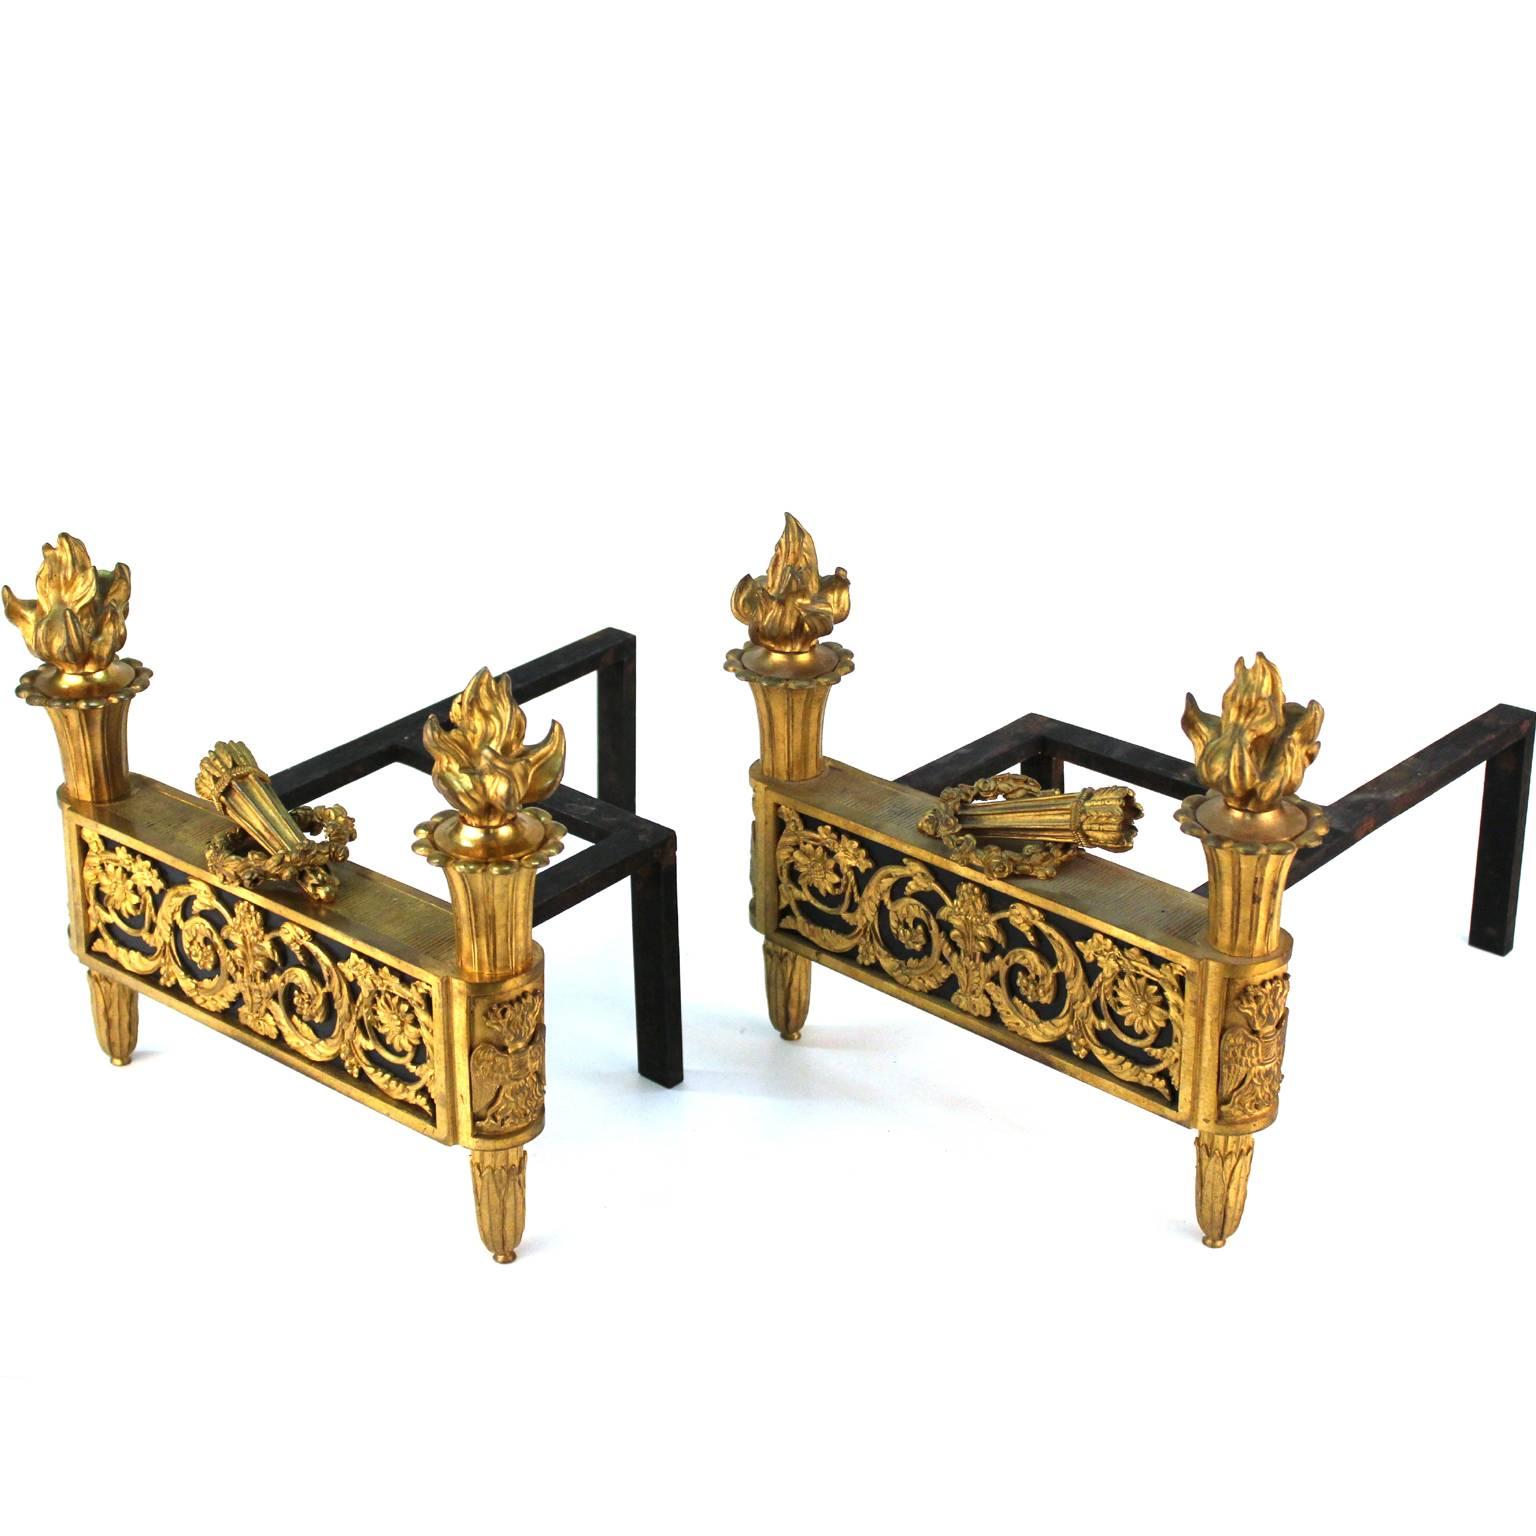 A pair of Maison Jansen style andirons in French Directoire style, made of gilded bronze. Intricate 18th century style decorative motives and torches adorn this impressive pair of fireplace accessories. Great condition, with original patina. No